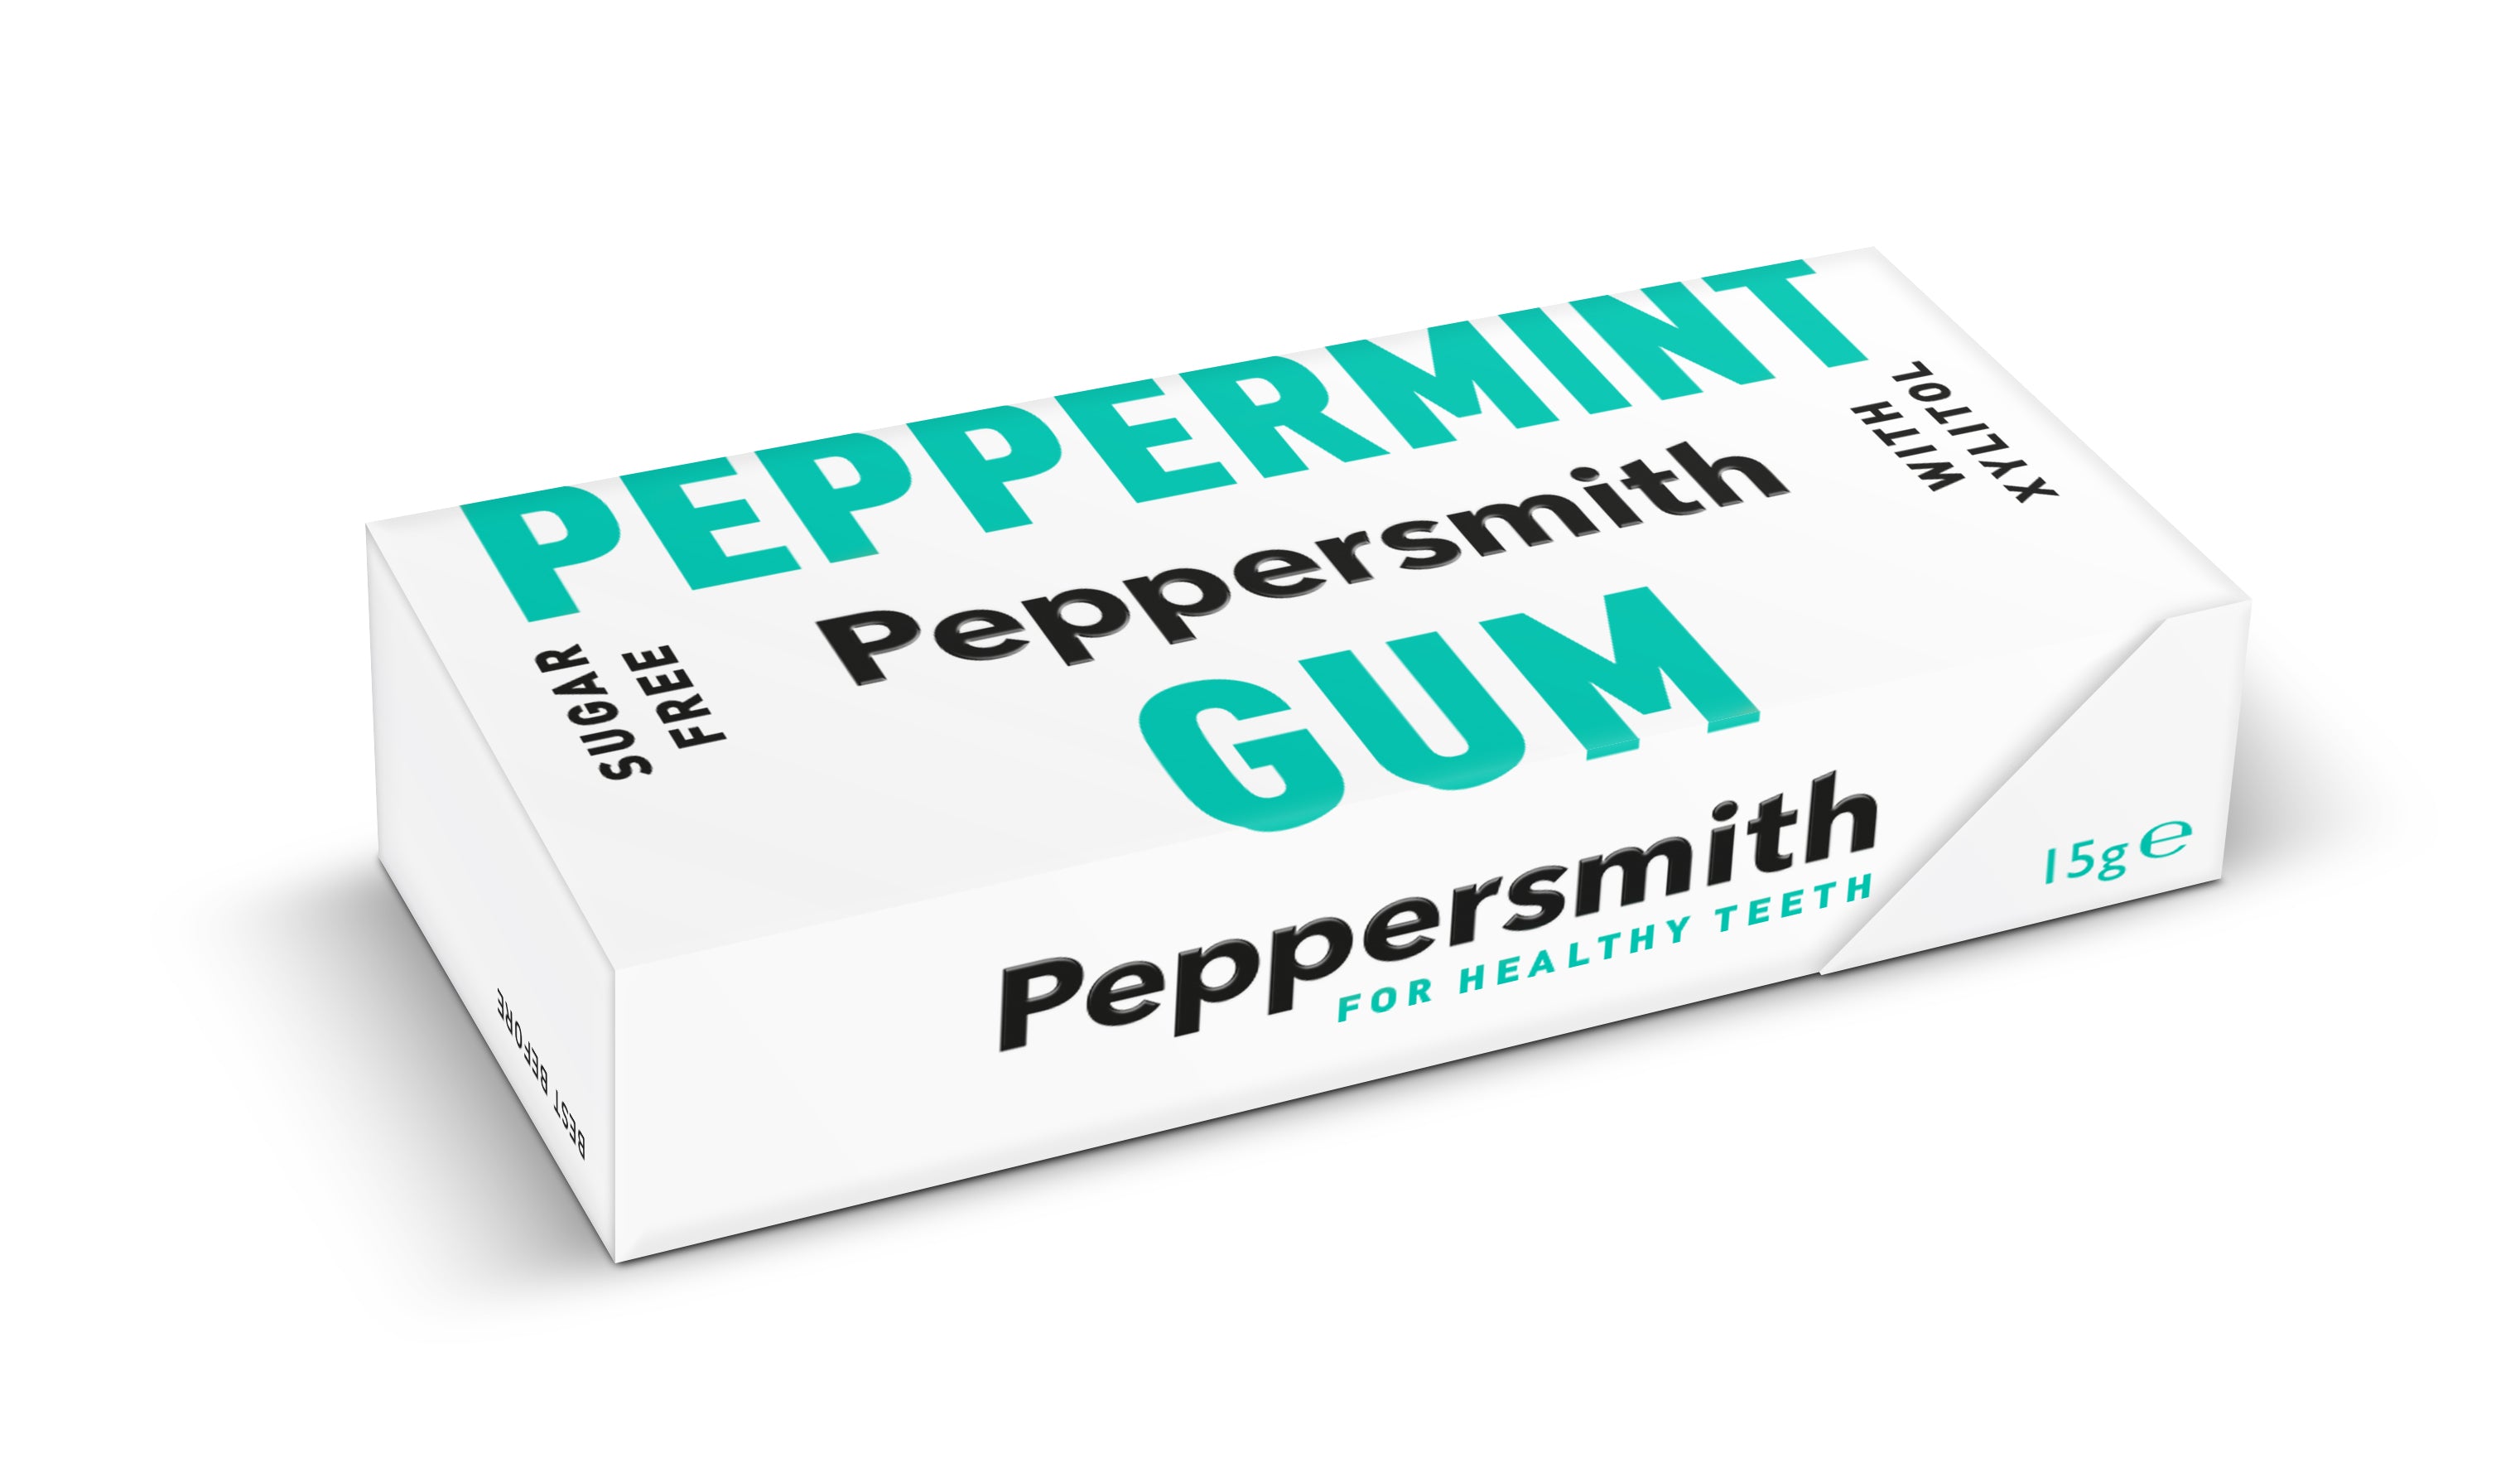 Peppersmith - Peppermint Gum // Stores Supply // PEPPERSMITHS